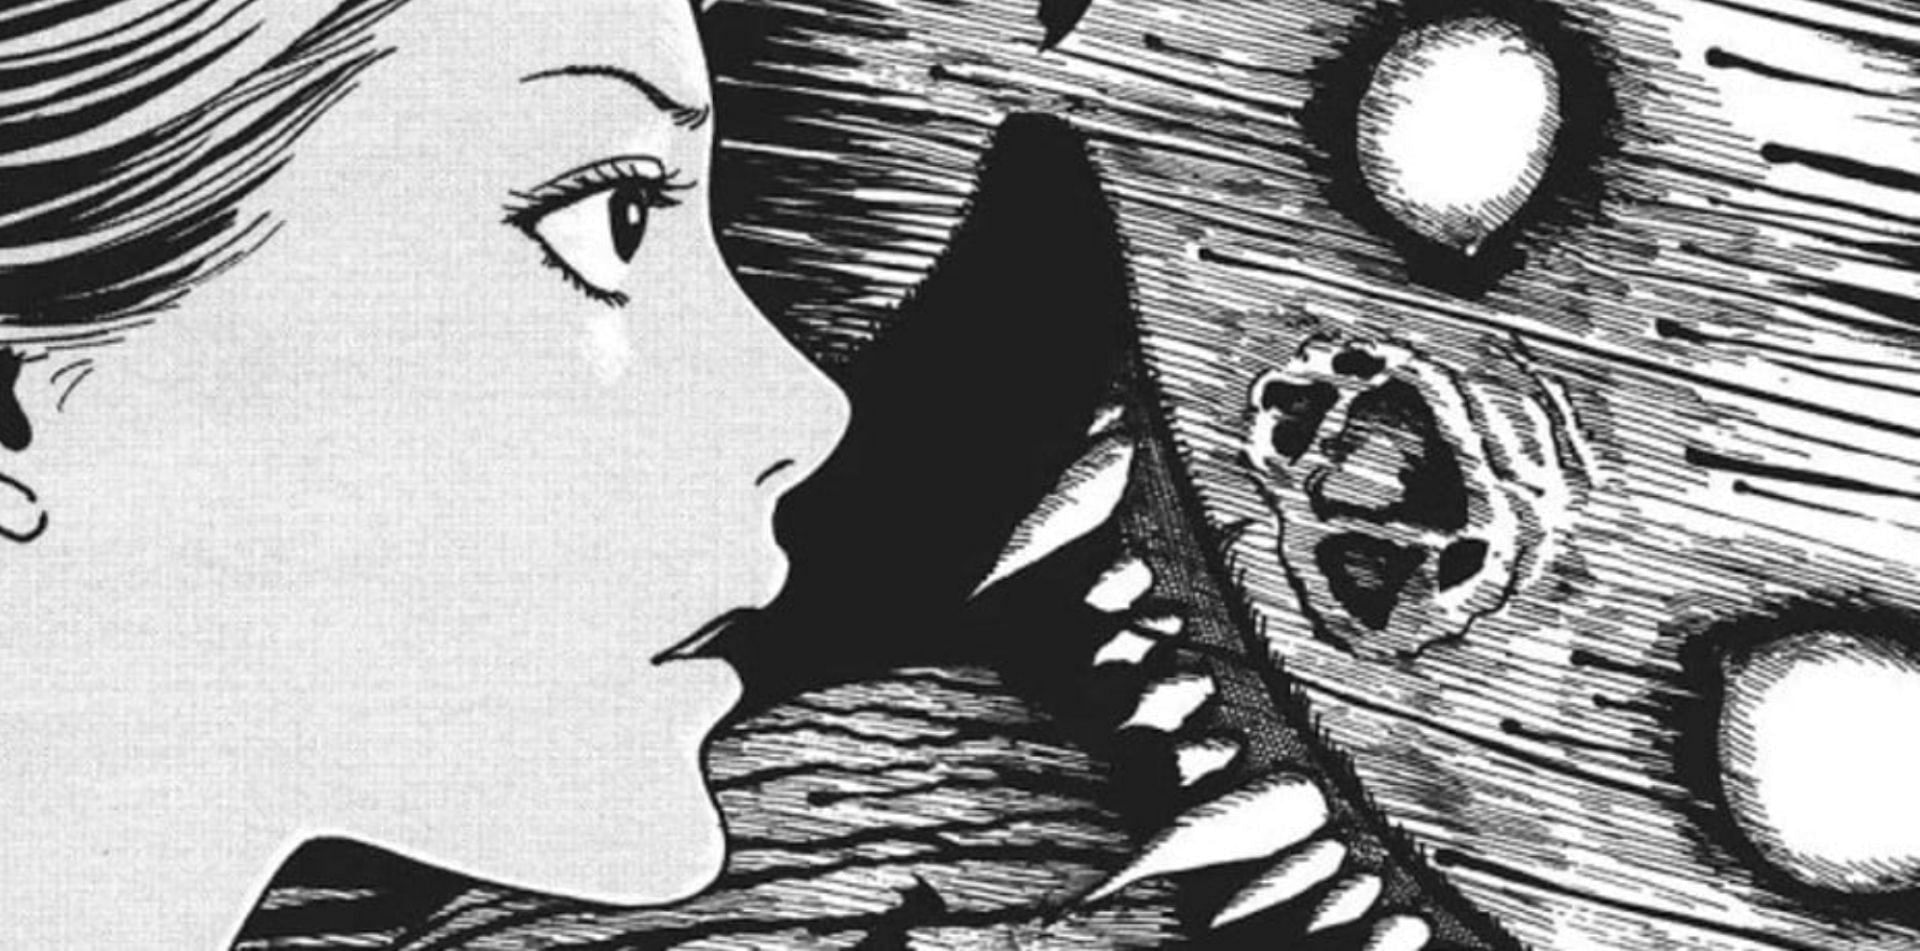 Has Junji Ito's work been given its proper justice? - Spiel Anime